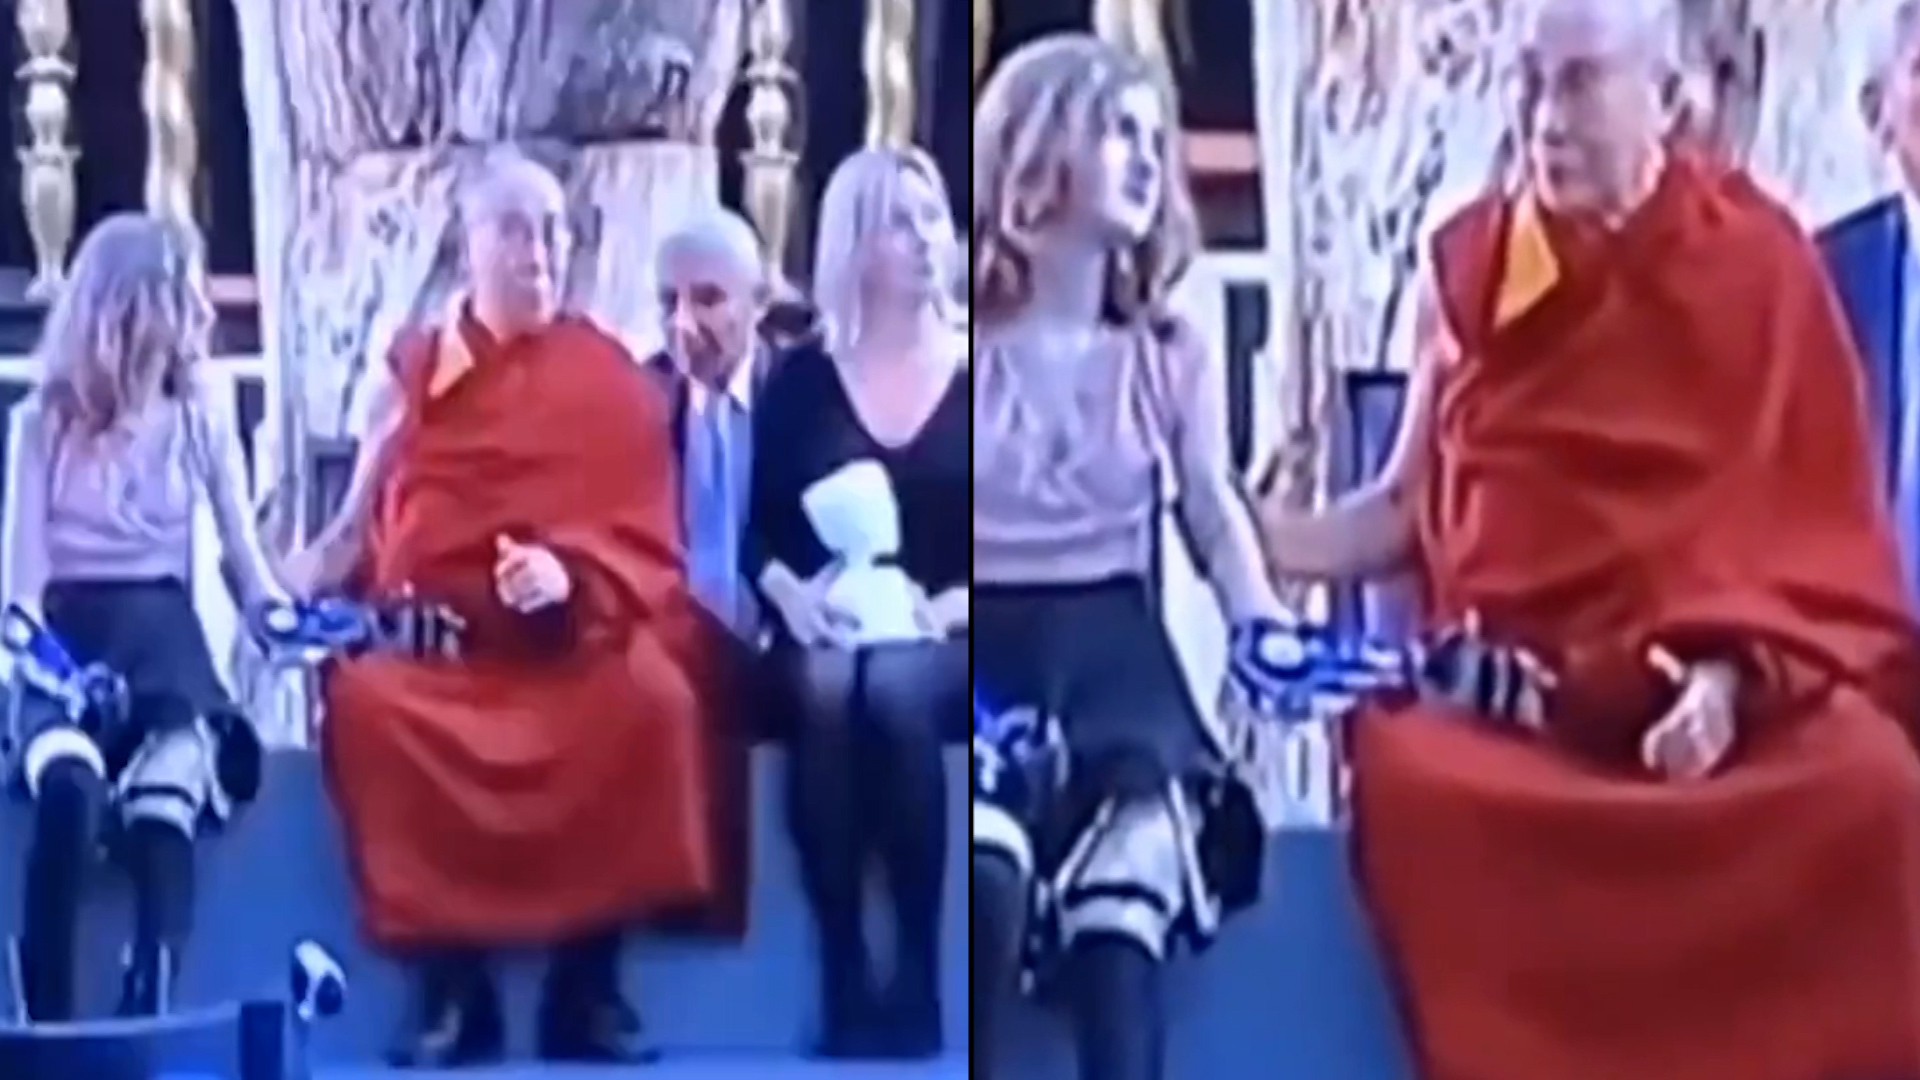 Dalai Lama at the centre of controversy once again, this time for caressing a young girl